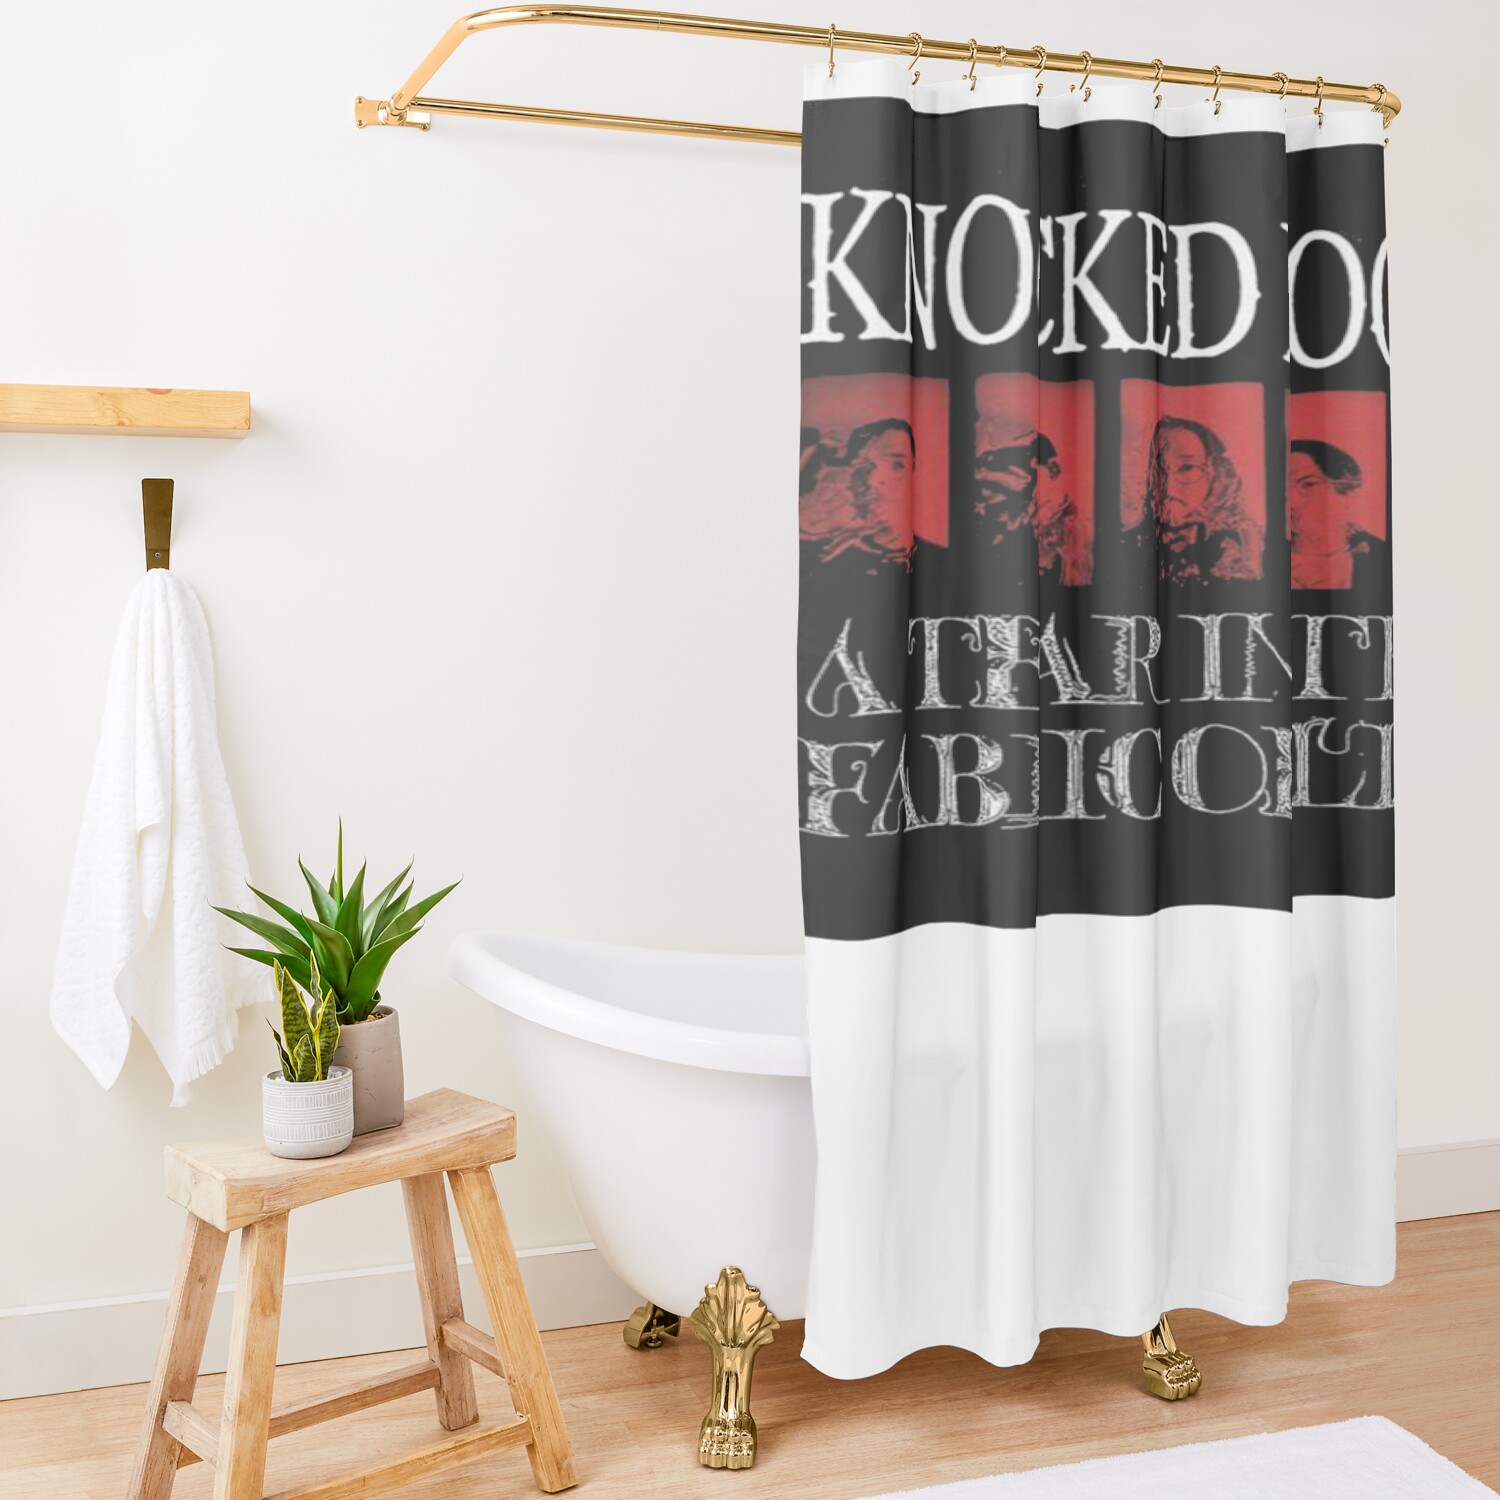 urshower curtain opensquare1500x1500 1 - Knocked Loose Shop